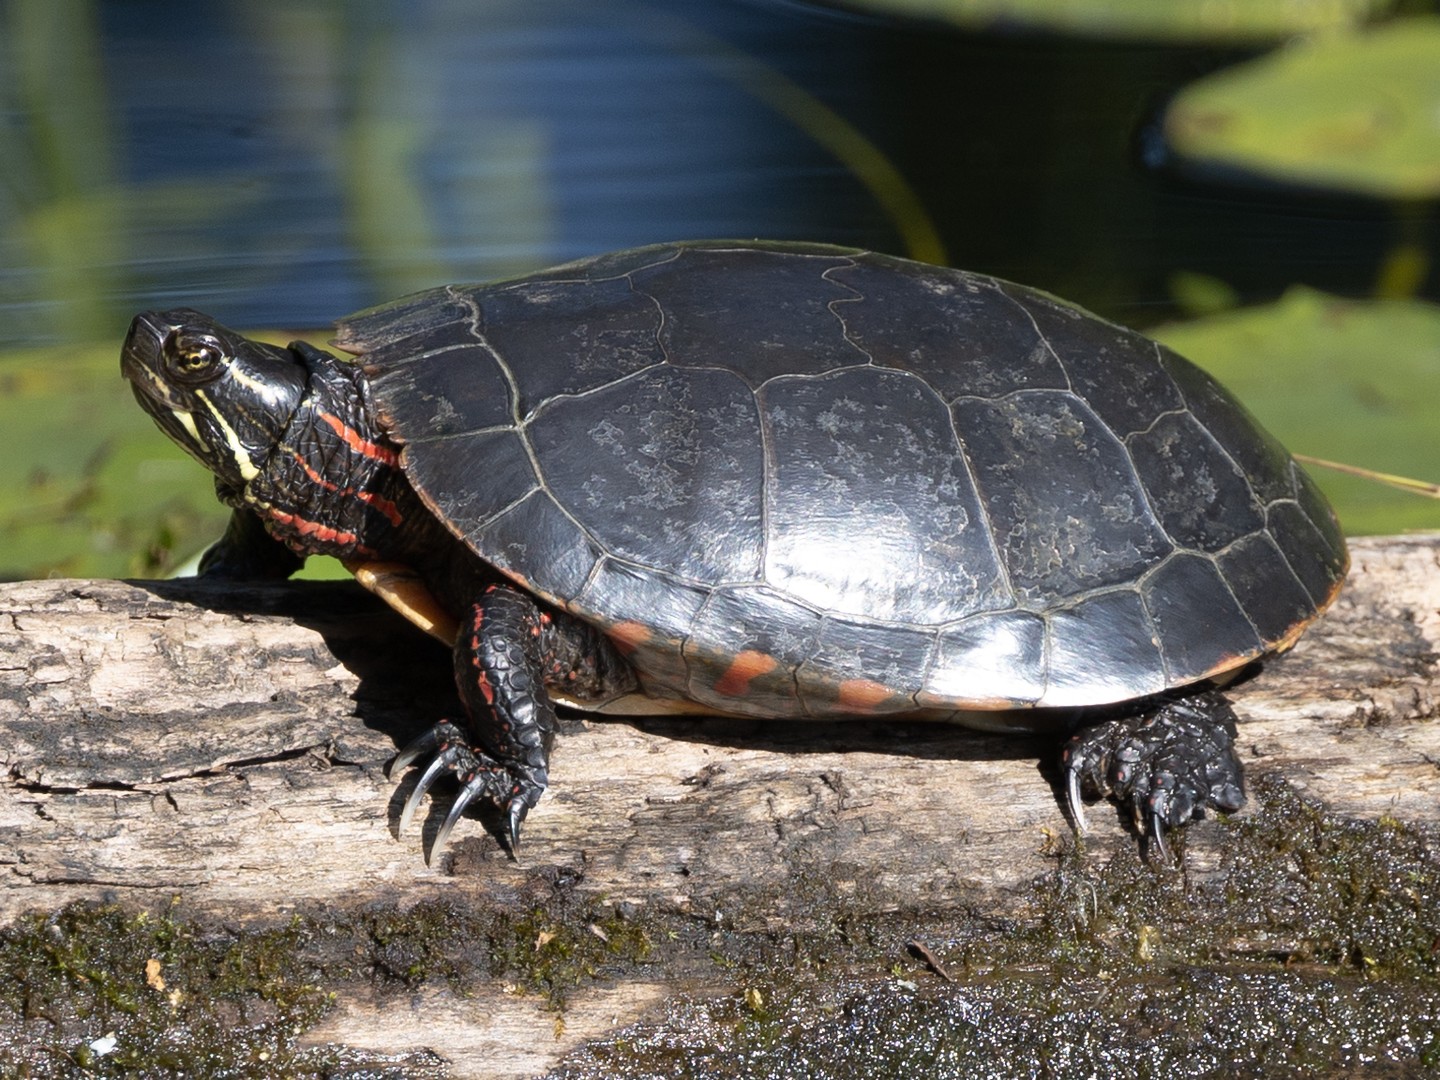 Painted turtle out on a log at mud lake. #paintedturtle #turtle #wildlifephotography #naturephotography #reptile